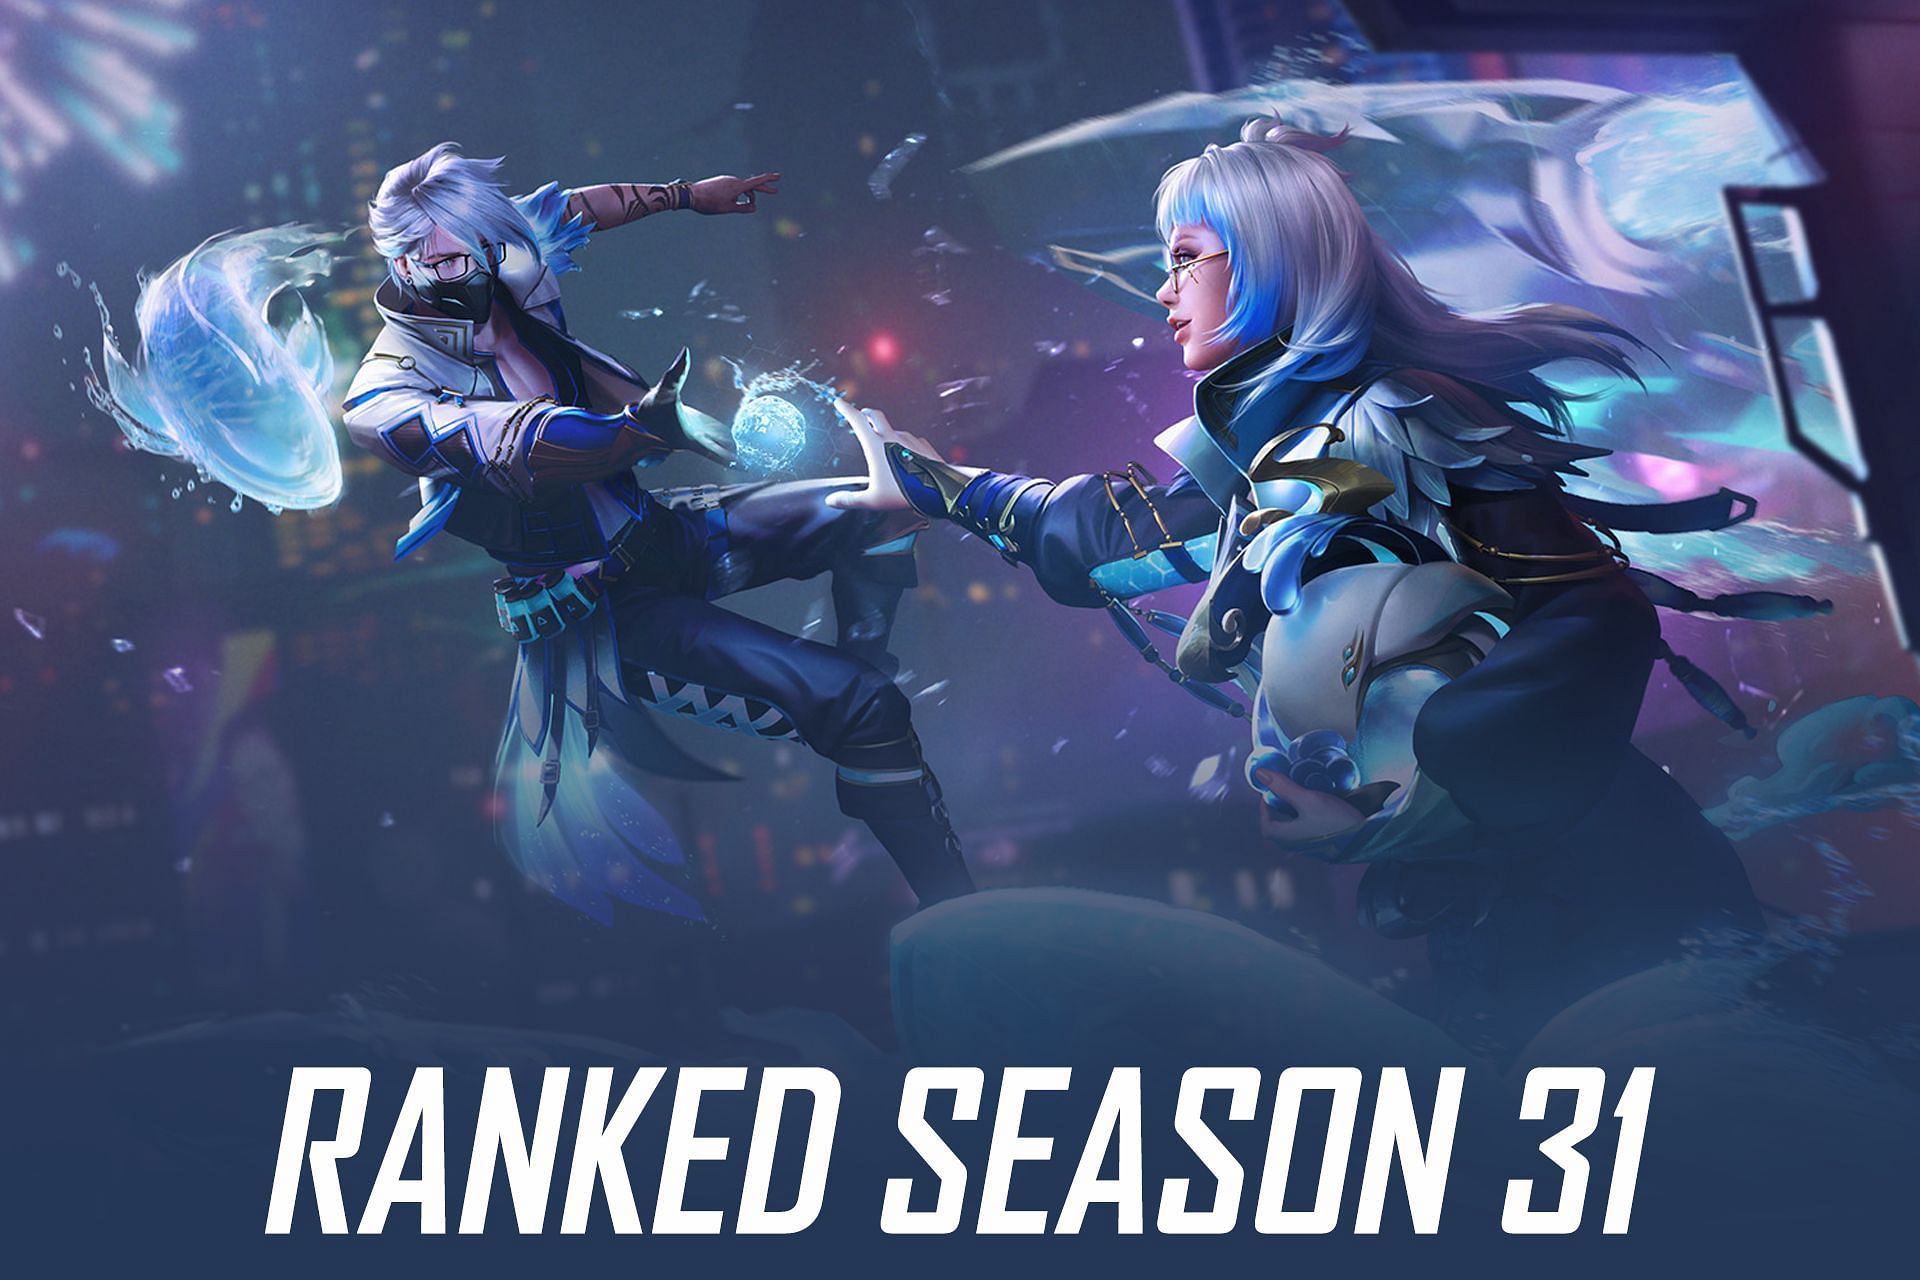 Details about the upcoming Free Fire MAX Ranked Season 31 (Image via Sportskeeda)